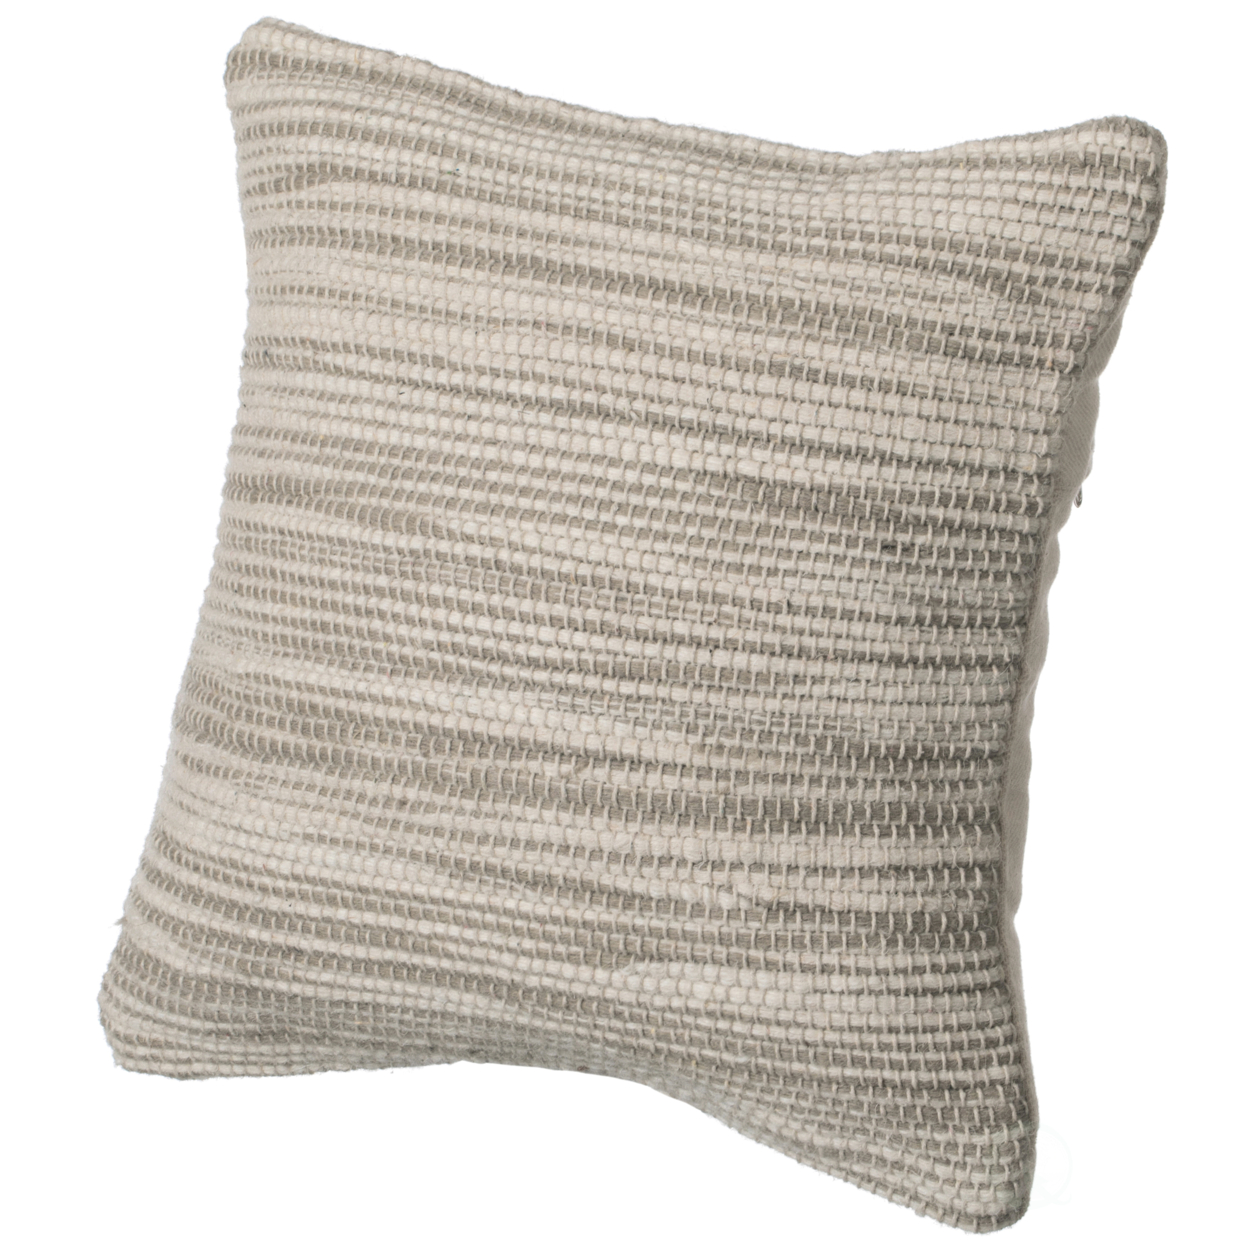 16 Handwoven Wool & Cotton Throw Pillow Cover With Woven Knit Texture - Sand With Cushion